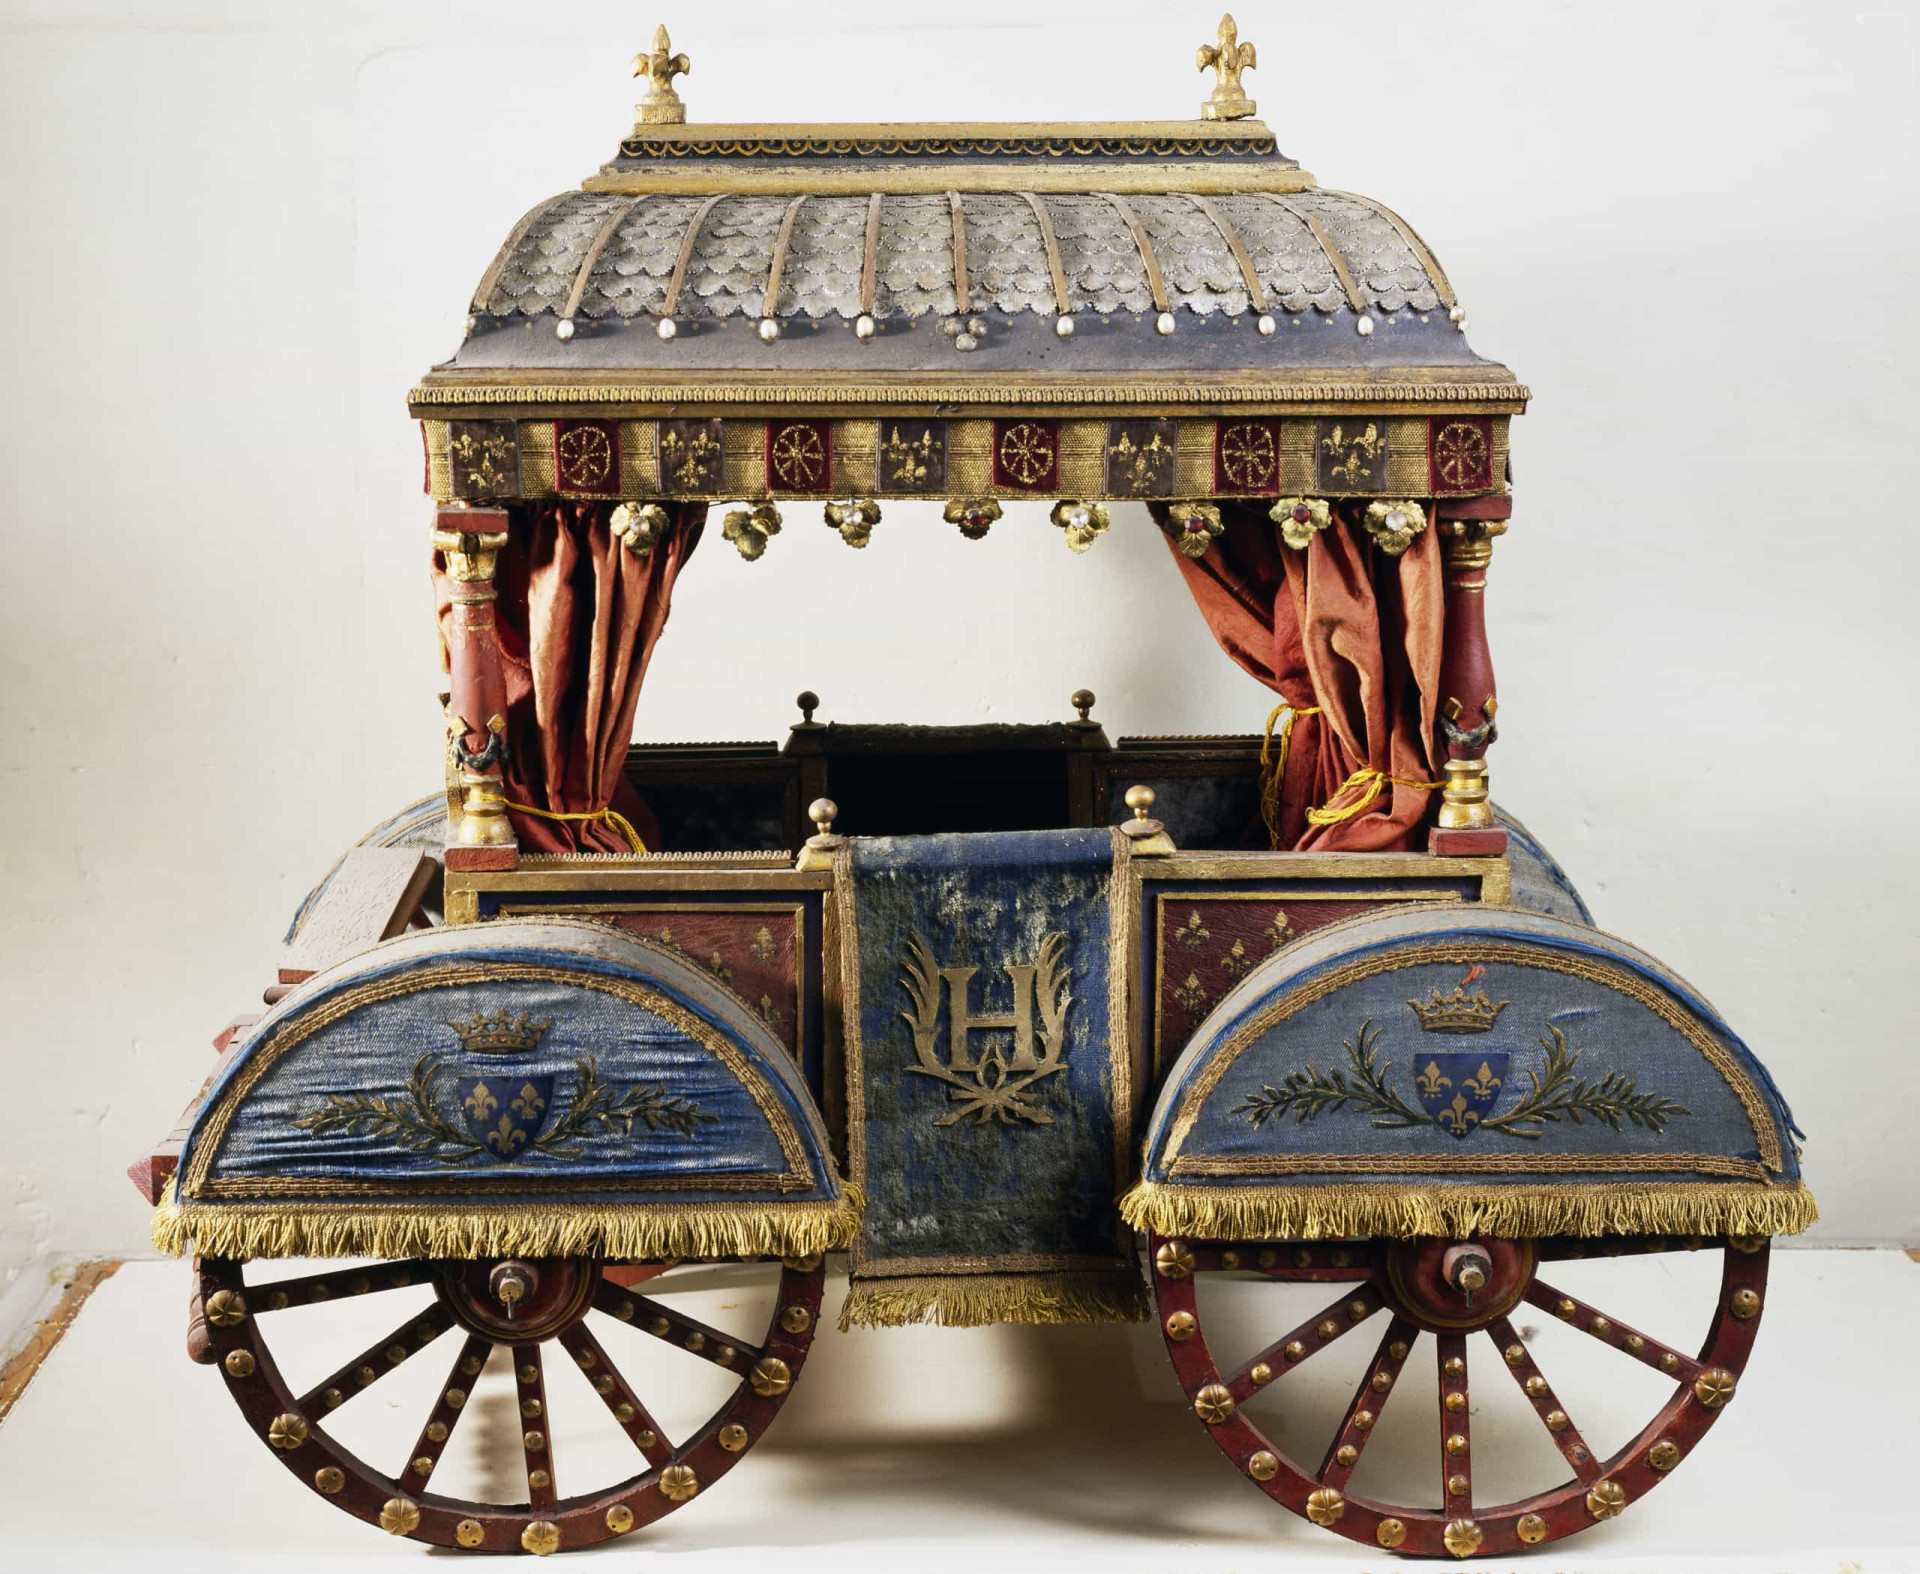 <p>The 16th century saw the arrival of the "four poster" carriage. Designed to offer more stability, these coaches were heavy and cumbersome, and used mainly for private purposes by monied individuals.</p><p>You may also like:<a href="https://www.starsinsider.com/n/229779?utm_source=msn.com&utm_medium=display&utm_campaign=referral_description&utm_content=516219v1en-us"> Why Australia doesn't exist according to flat-Earthers </a></p>